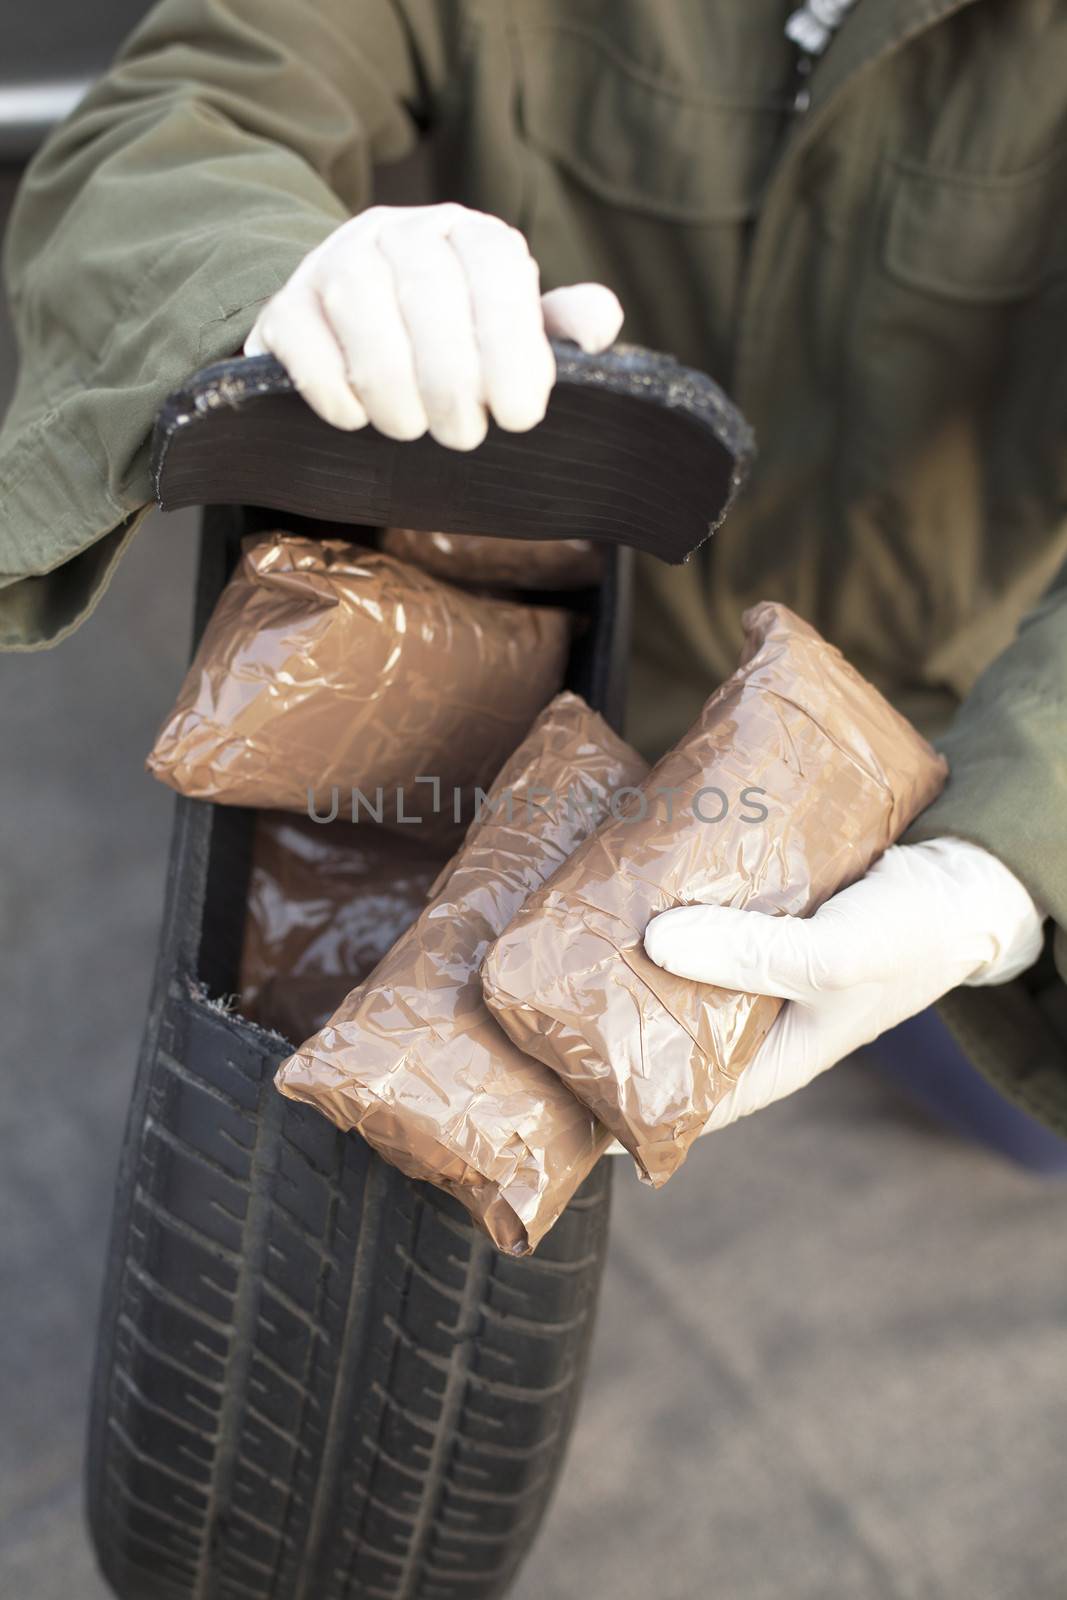 Illegal drug trade by wellphoto